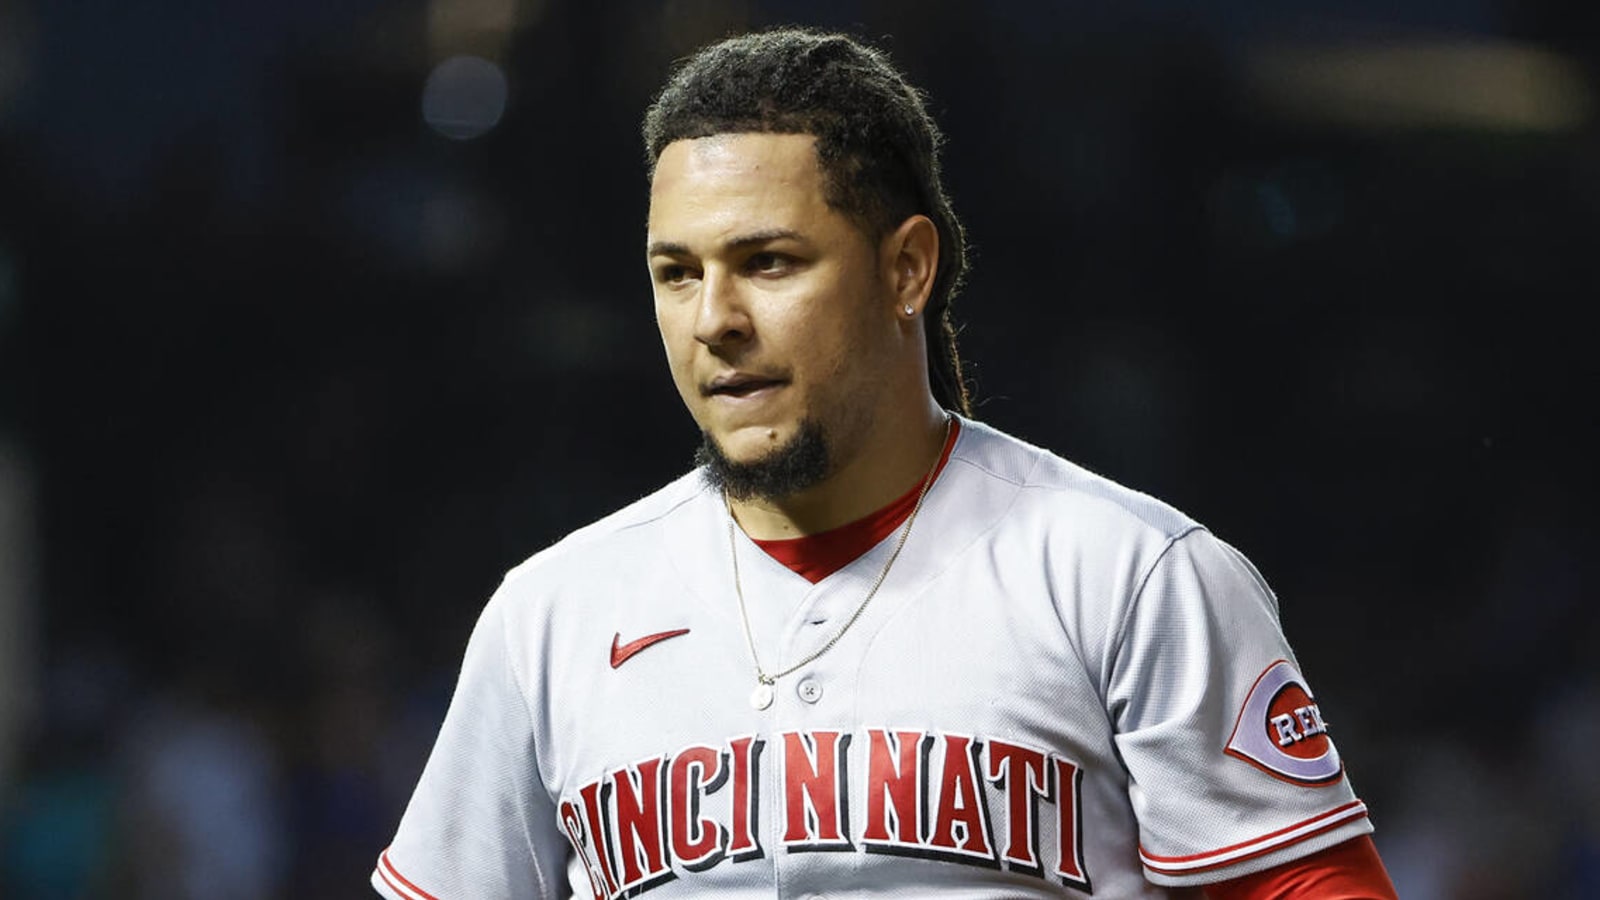 Mets reportedly could have serious competition from Dodgers for Luis Castillo